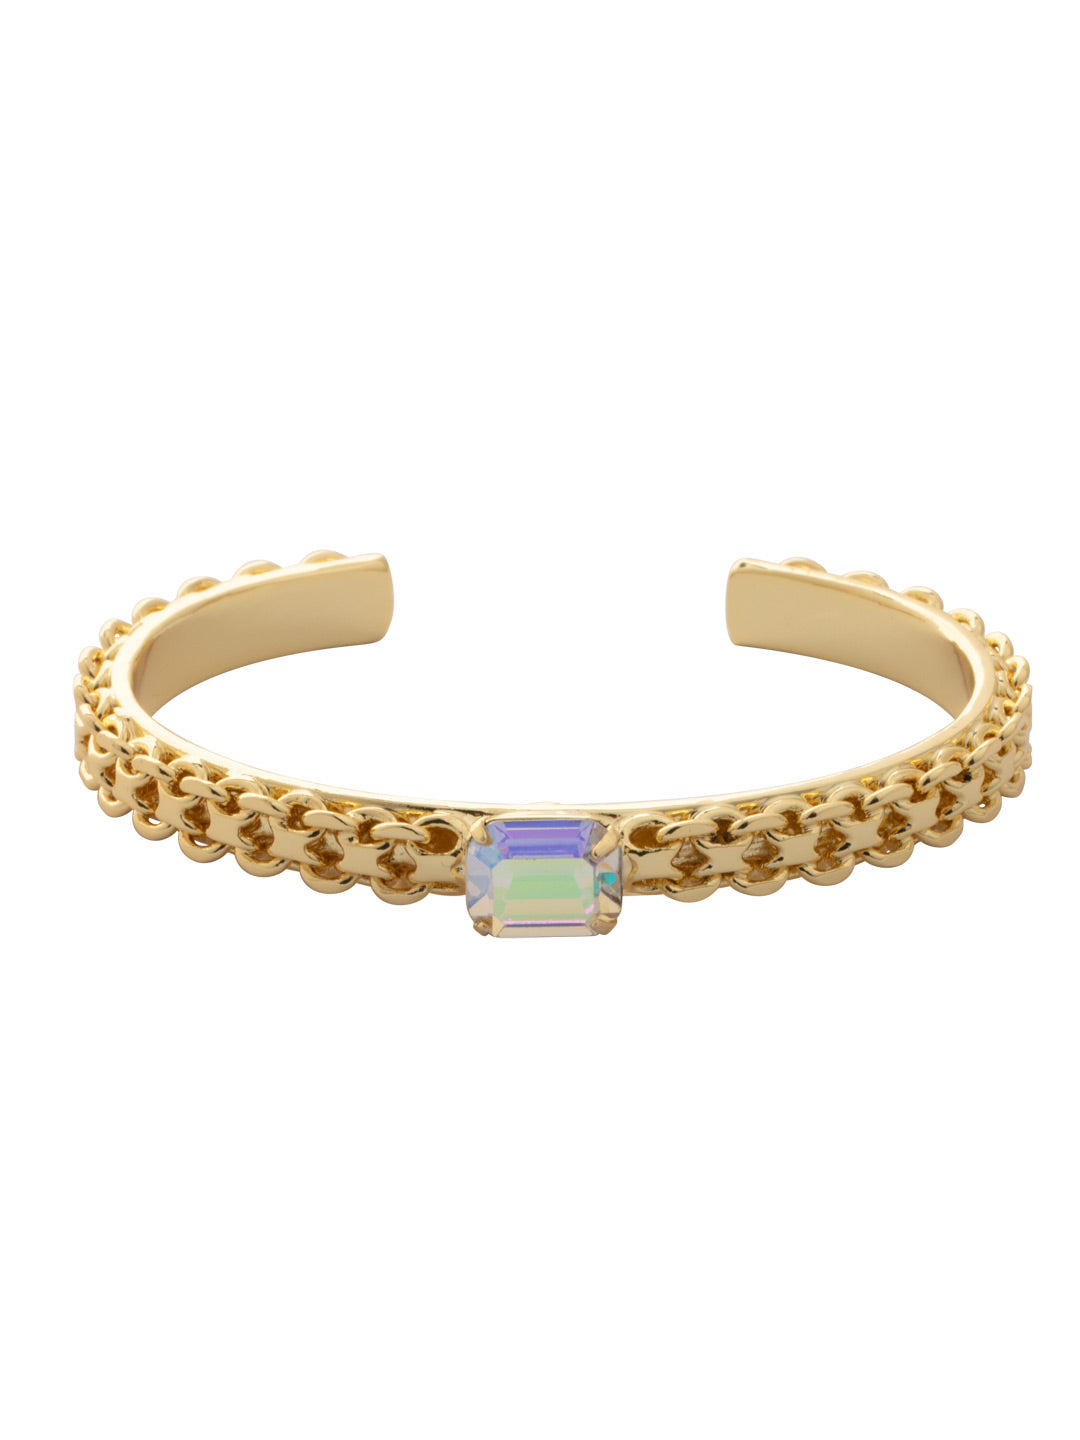 Octavia Cuff Bracelet - BFK6BGCAB - <p>The Octavia Cuff Bracelet features a frozen curb link chain design on an adjustable metal band, embellished with a single emerald cut crystal. From Sorrelli's Crystal Aurora Borealis collection in our Bright Gold-tone finish.</p>